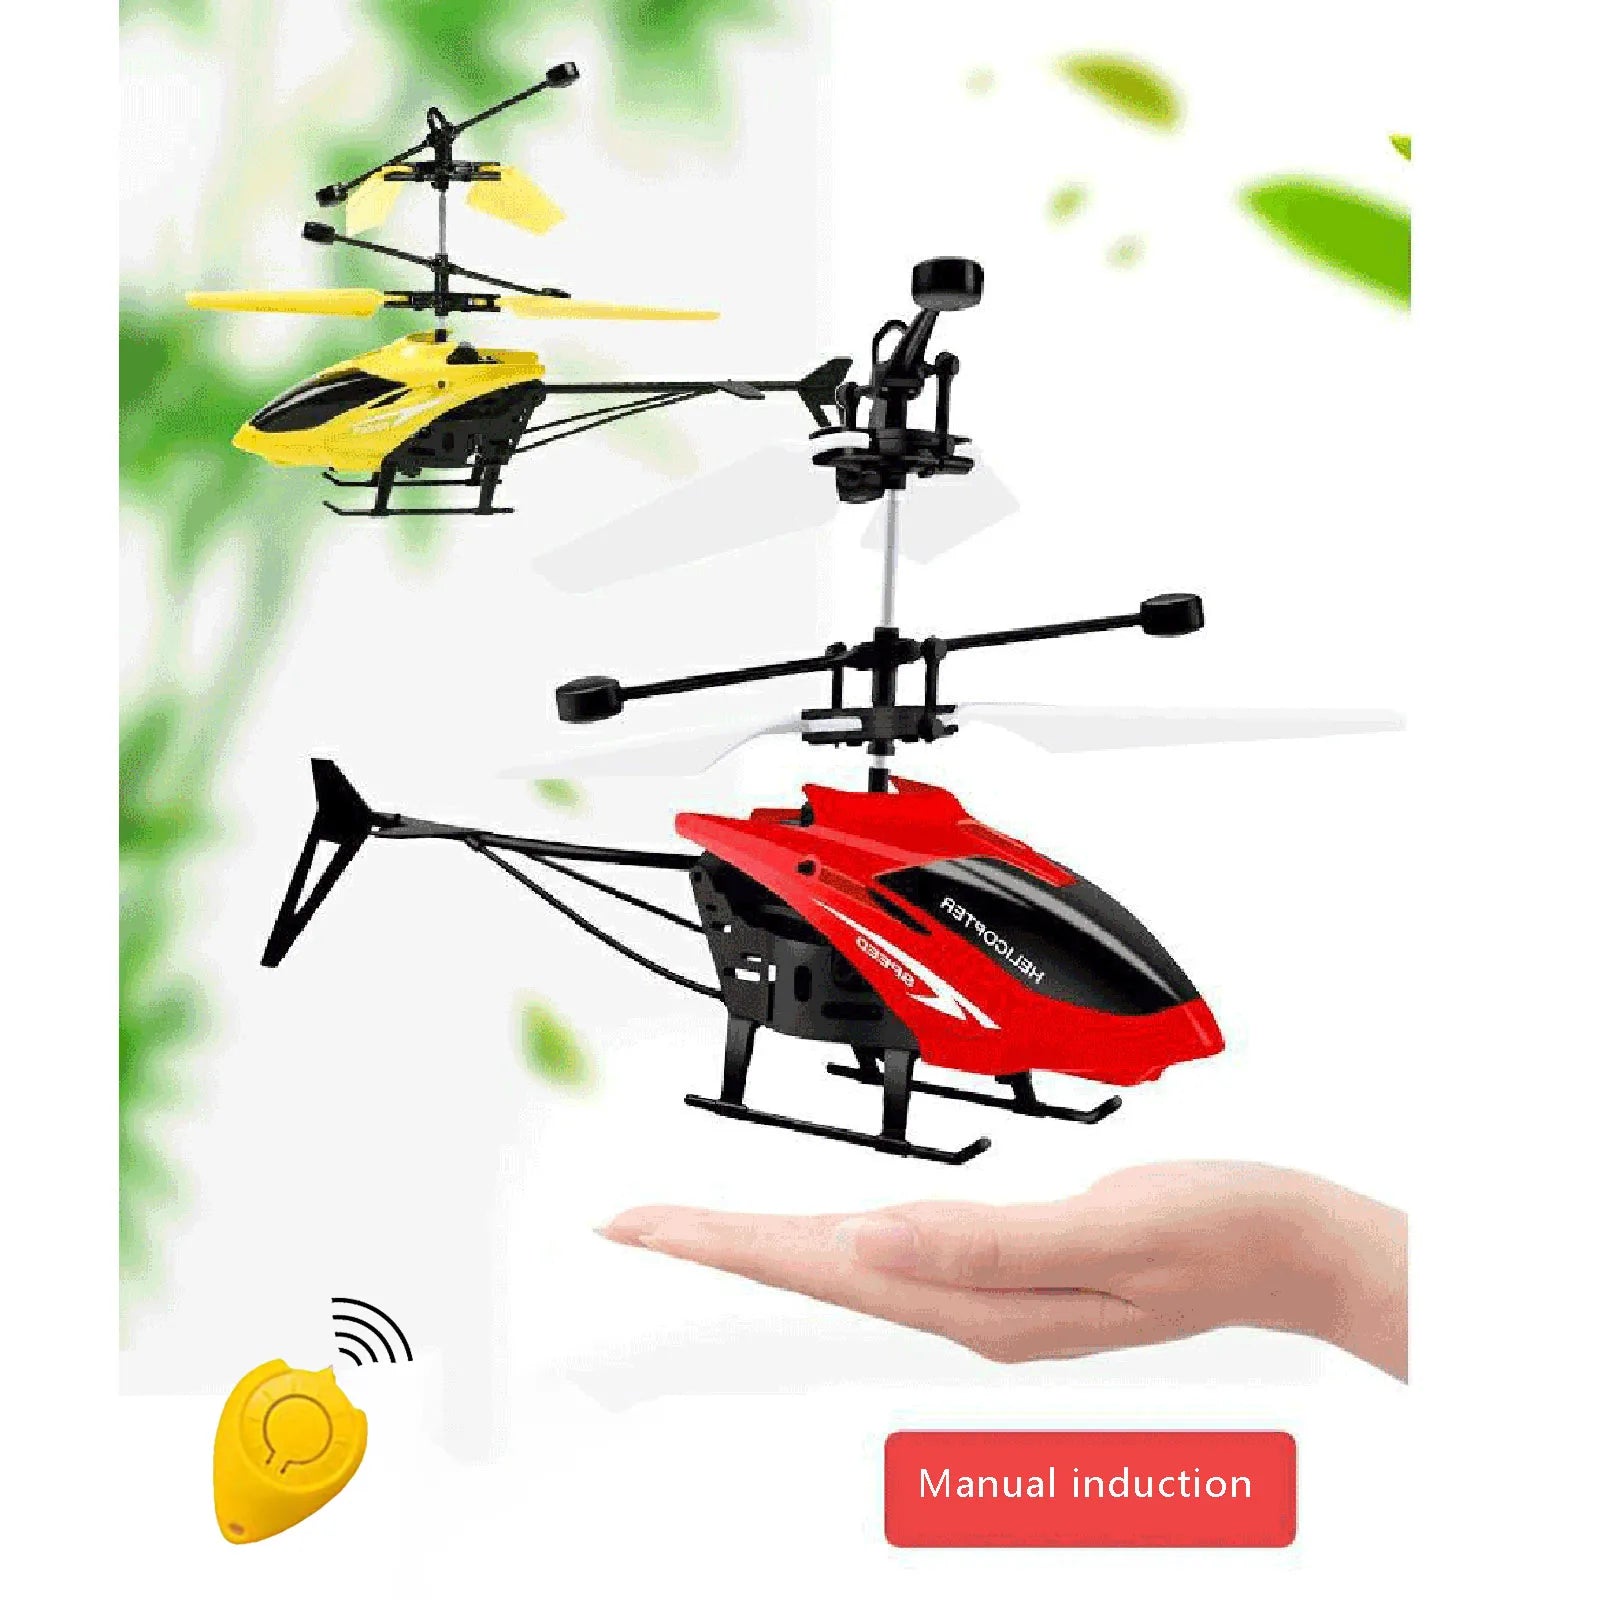 YKF1303 RC Helicopter, Manual induction Abtrodijbh 005